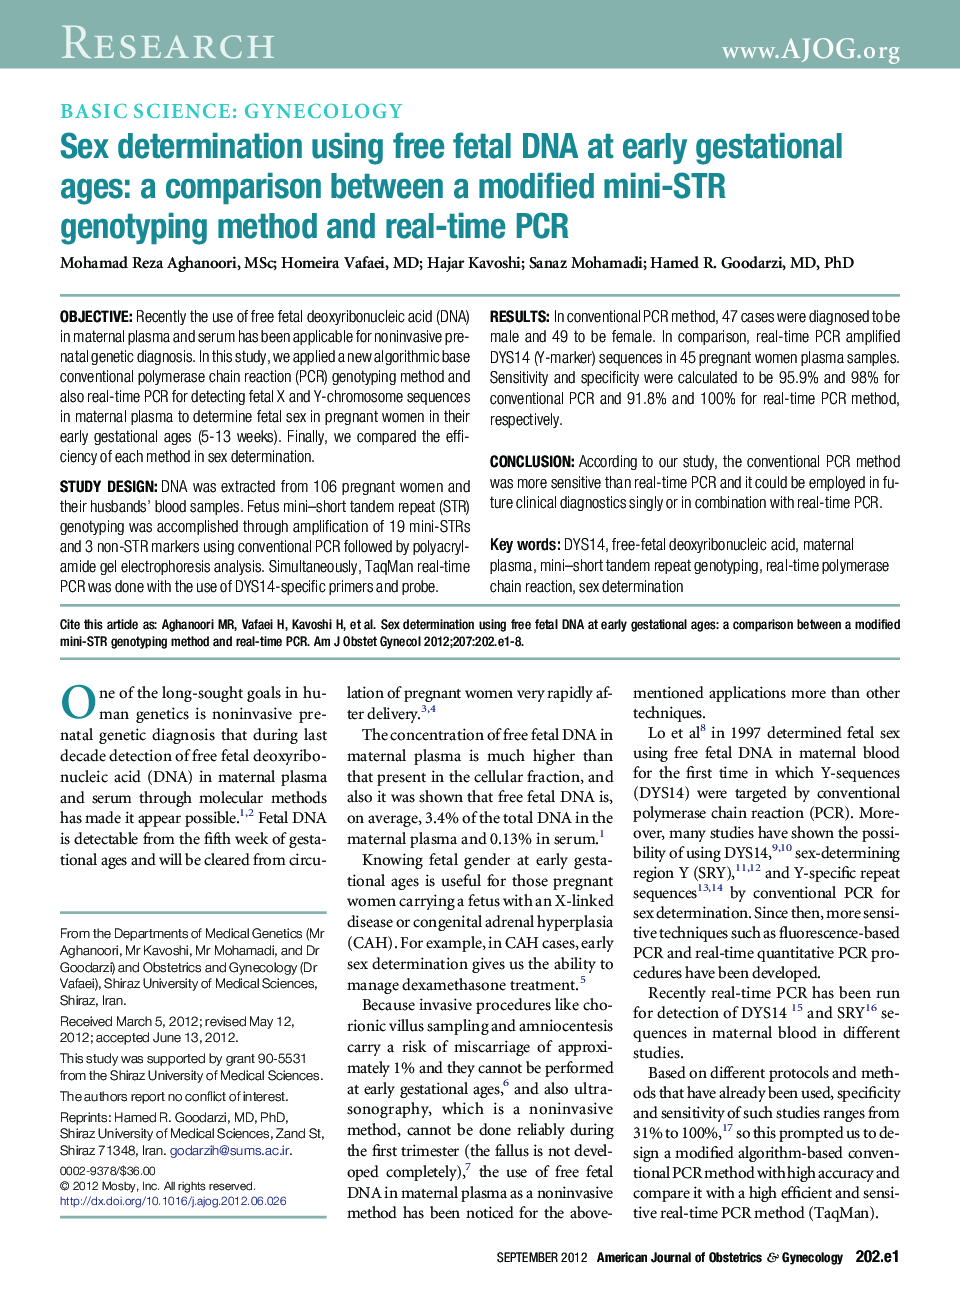 Sex determination using free fetal DNA at early gestational ages: a comparison between a modified mini-STR genotyping method and real-time PCR